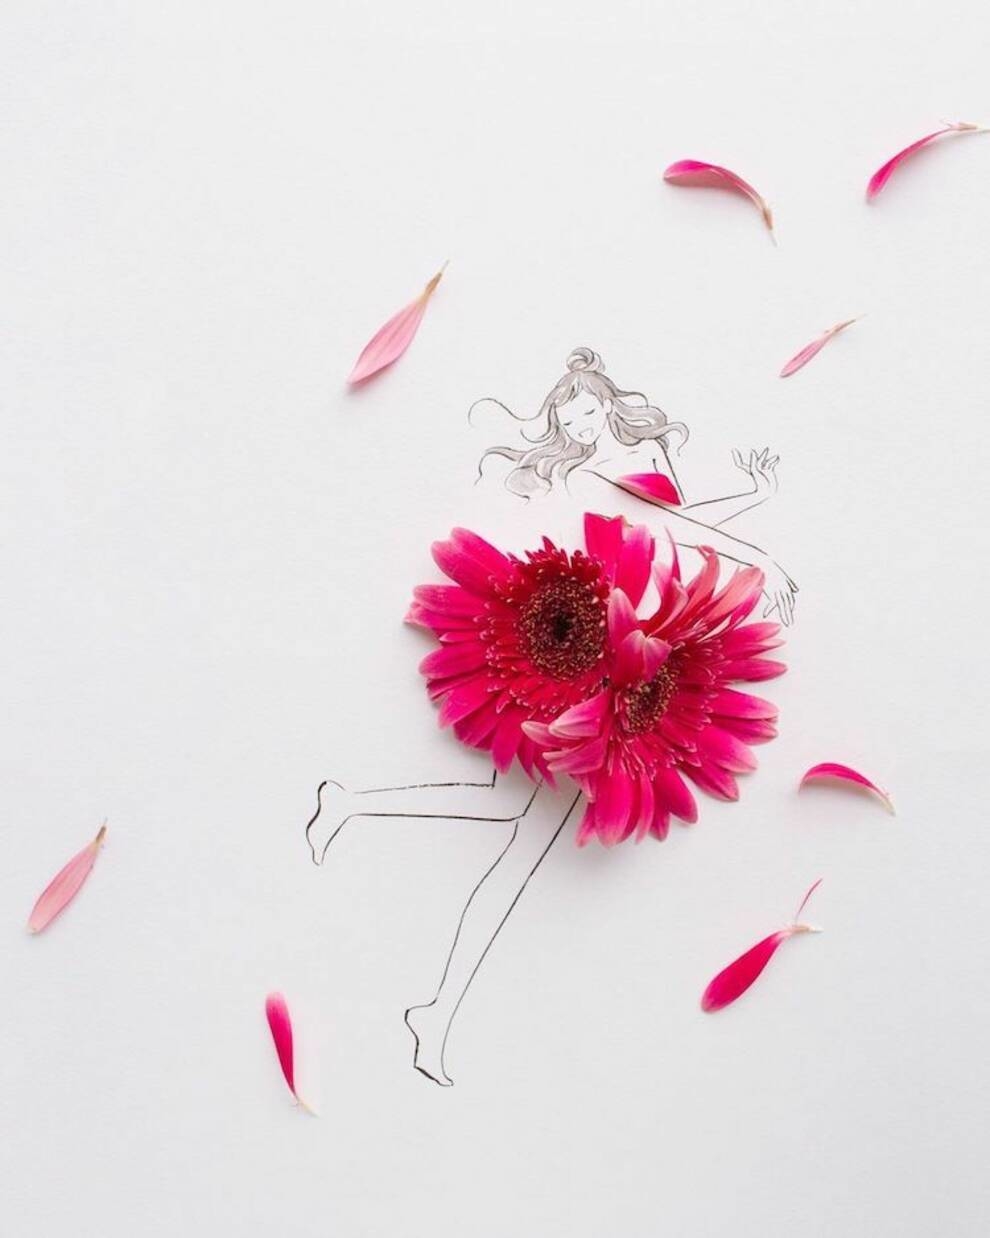 Flowers and dresses - spring compositions by a Japanese artist